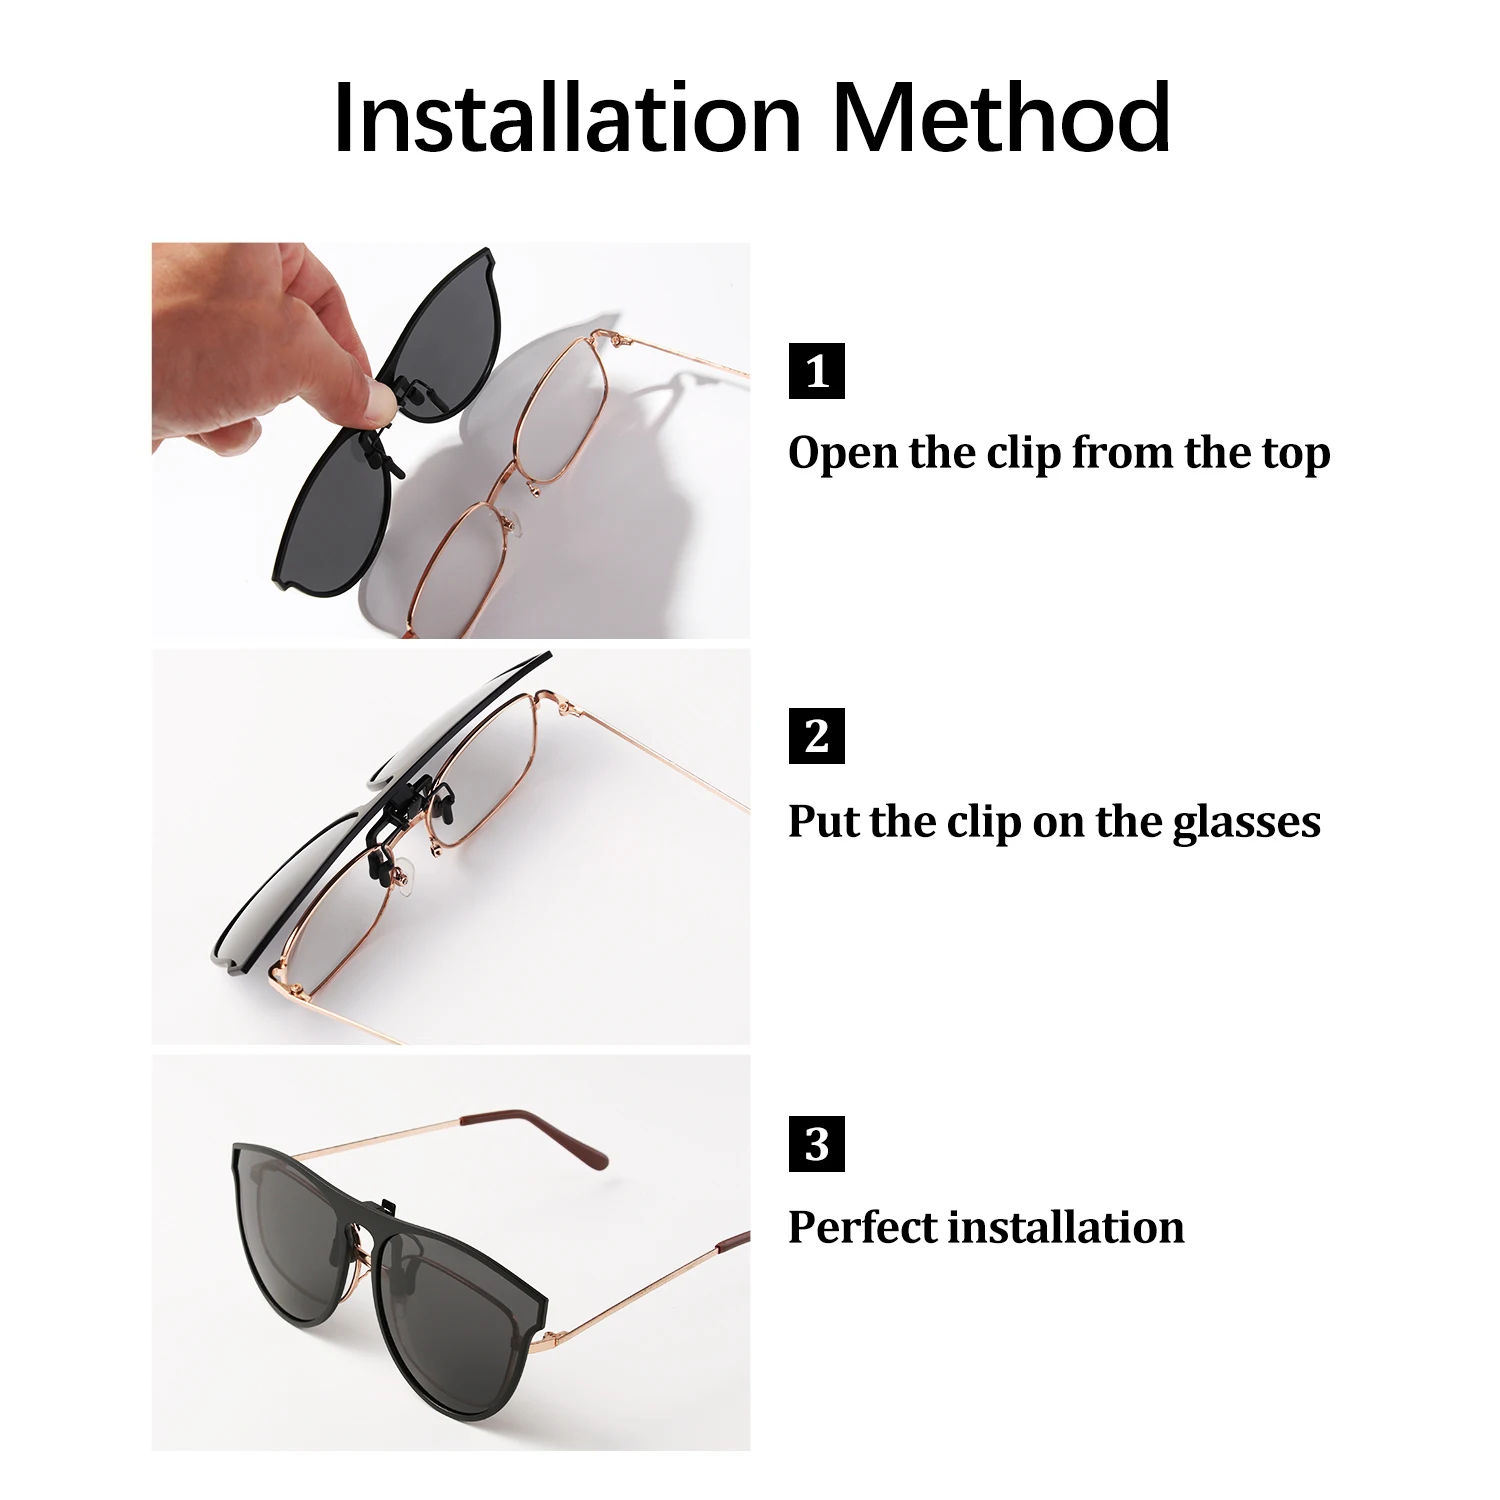 1 PCS Unisex Sunglasses Anti-Glare Driving Polarized Clip-on Glasses With Flip Up for Prescription Glasses UV Protection 2021 square sunglasses women Sunglasses